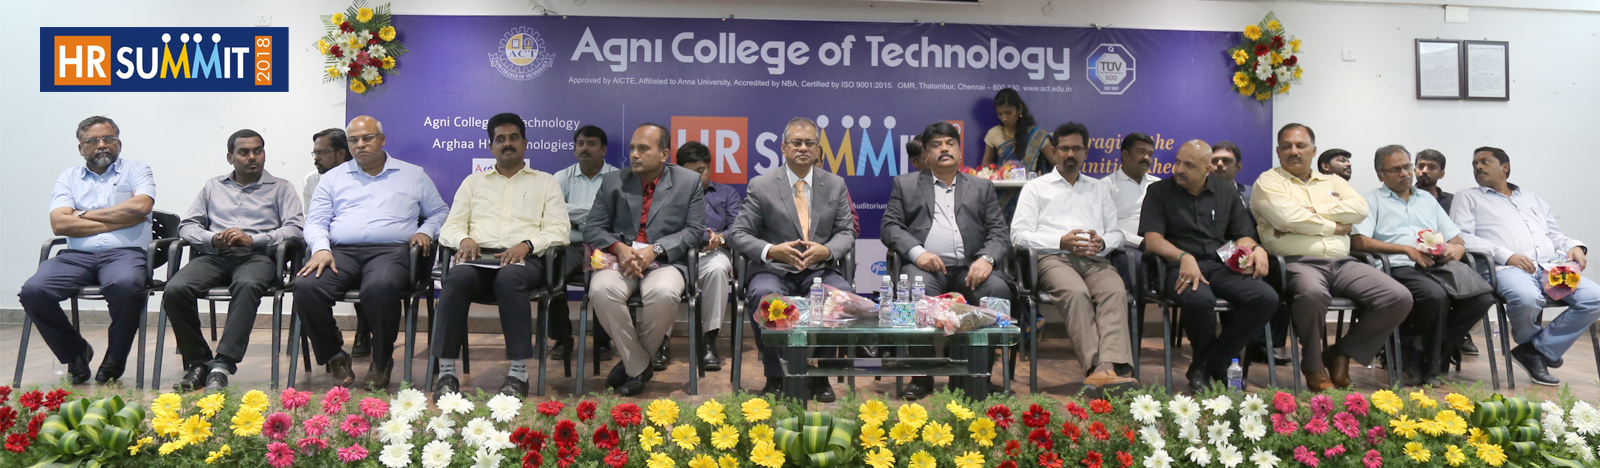 ACT-NIPRO Agni College Of Technology NIPPON PROFESSIONALS March 28, 2018